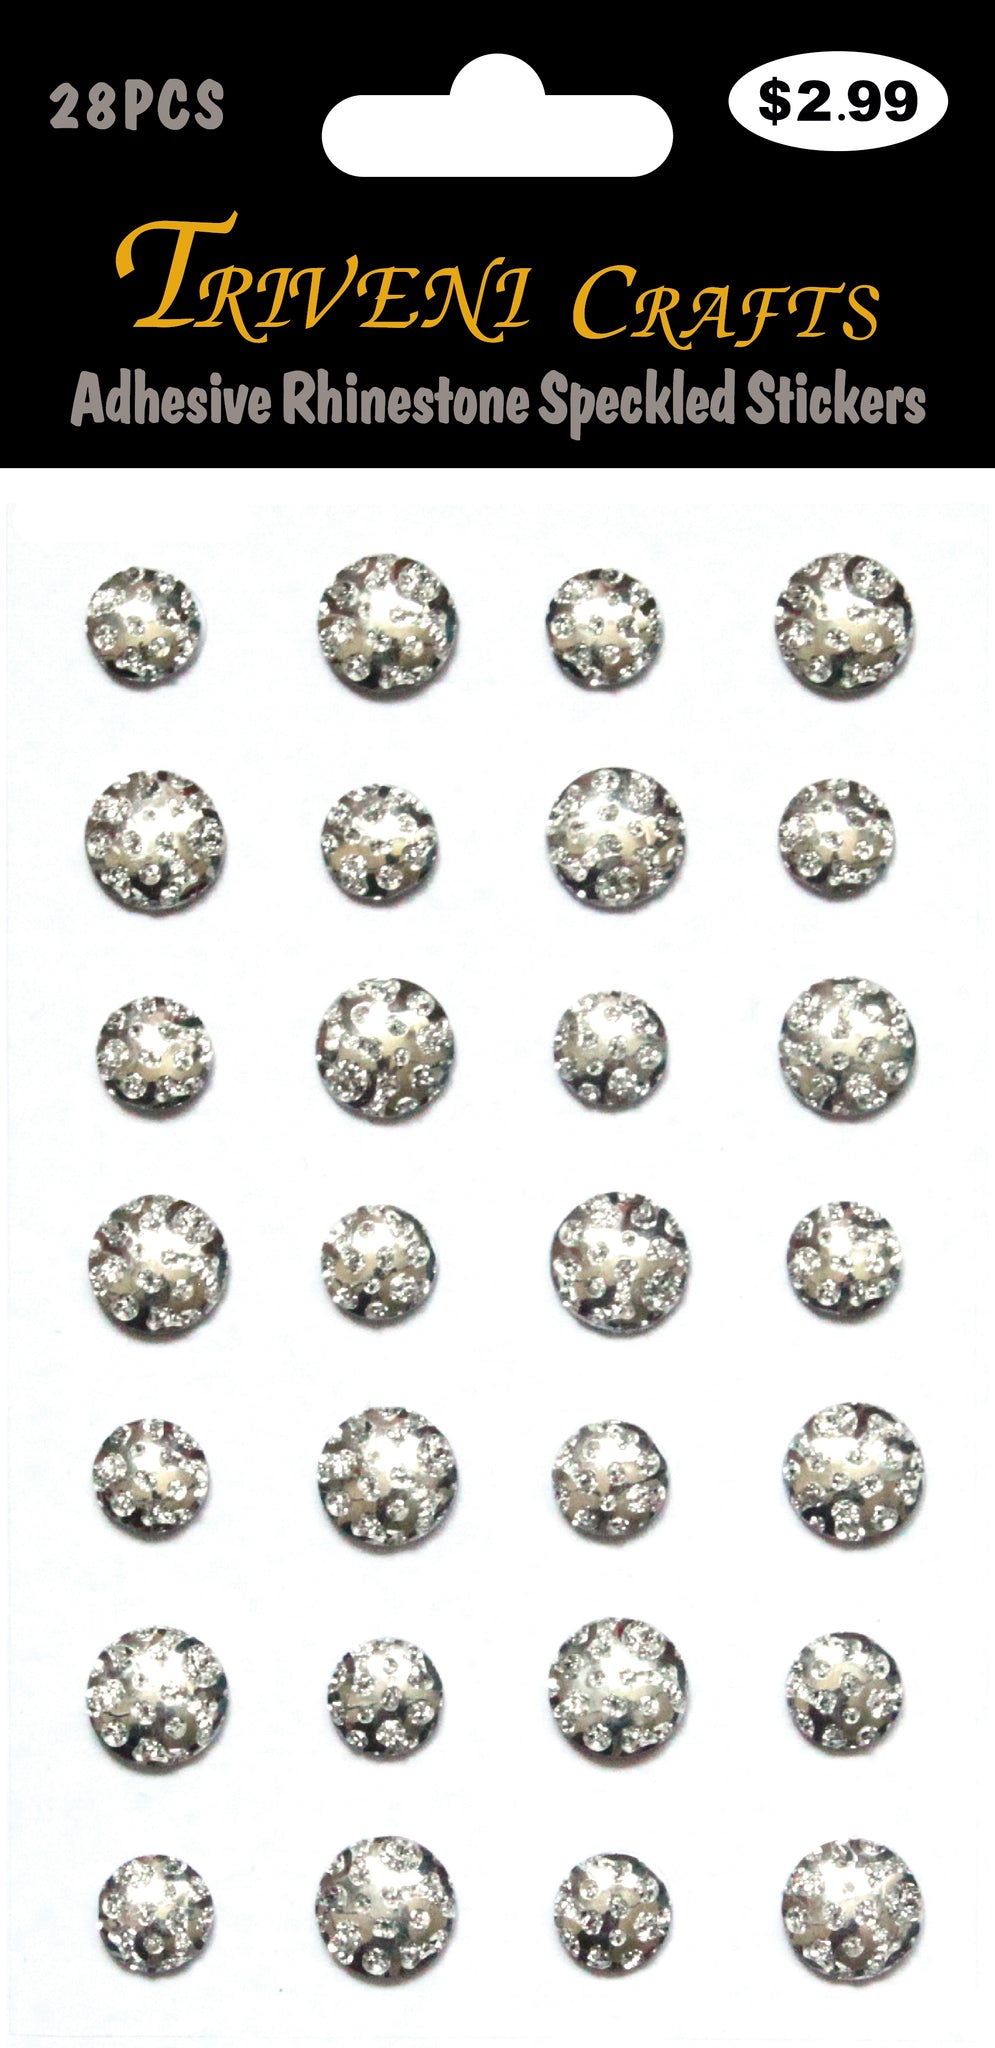 Adhesive Rhinestone Speckled AB Stickers - Silver